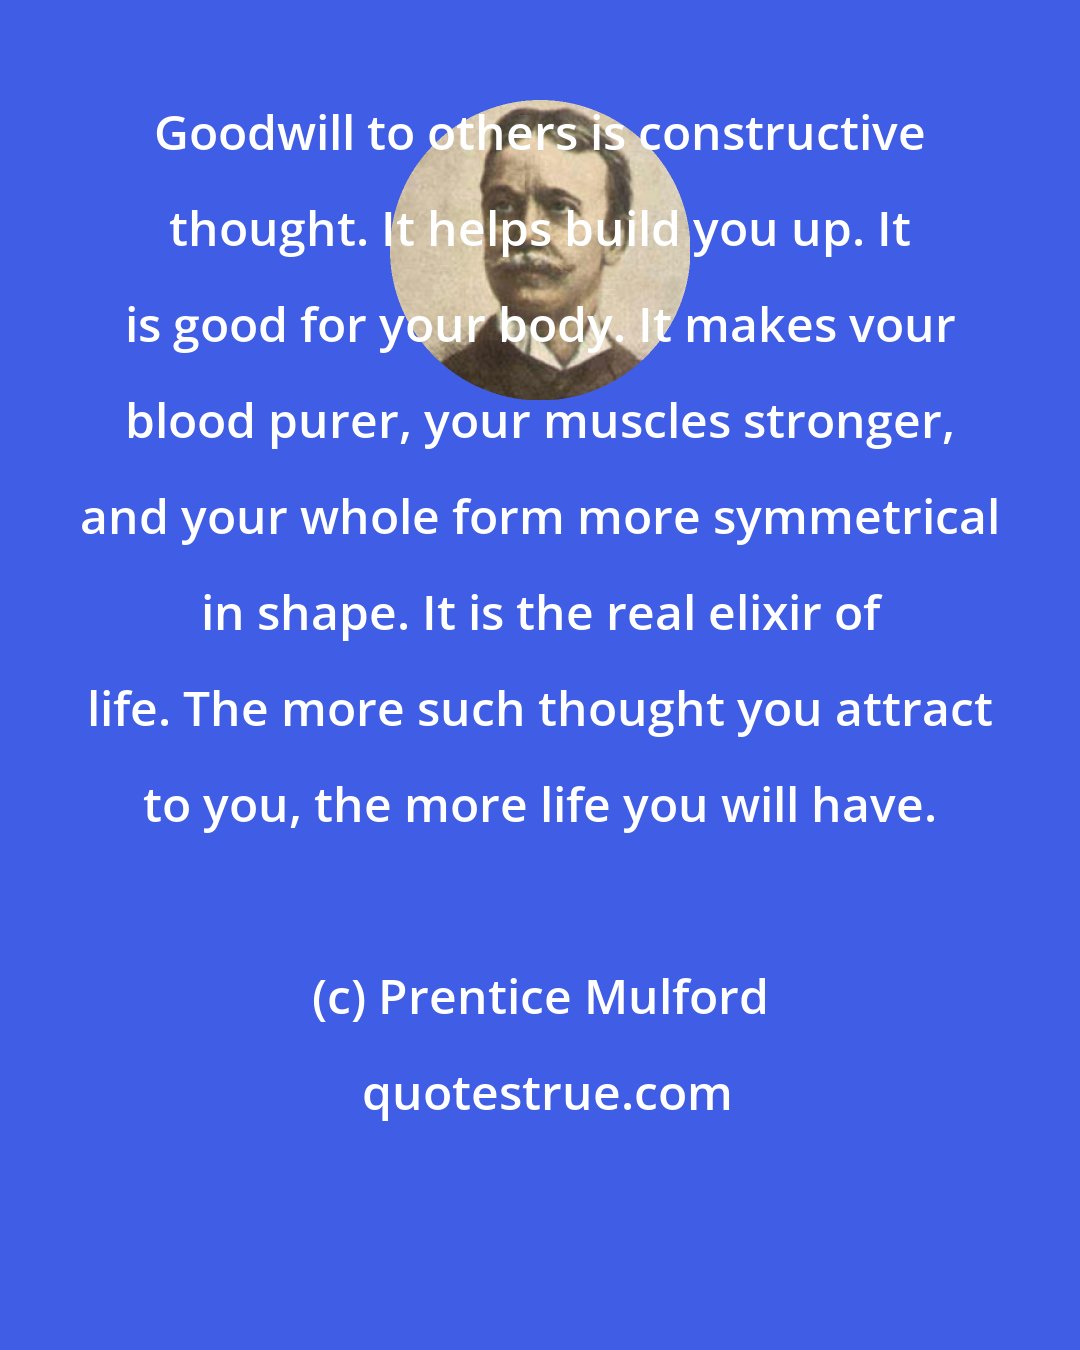 Prentice Mulford: Goodwill to others is constructive thought. It helps build you up. It is good for your body. It makes vour blood purer, your muscles stronger, and your whole form more symmetrical in shape. It is the real elixir of life. The more such thought you attract to you, the more life you will have.